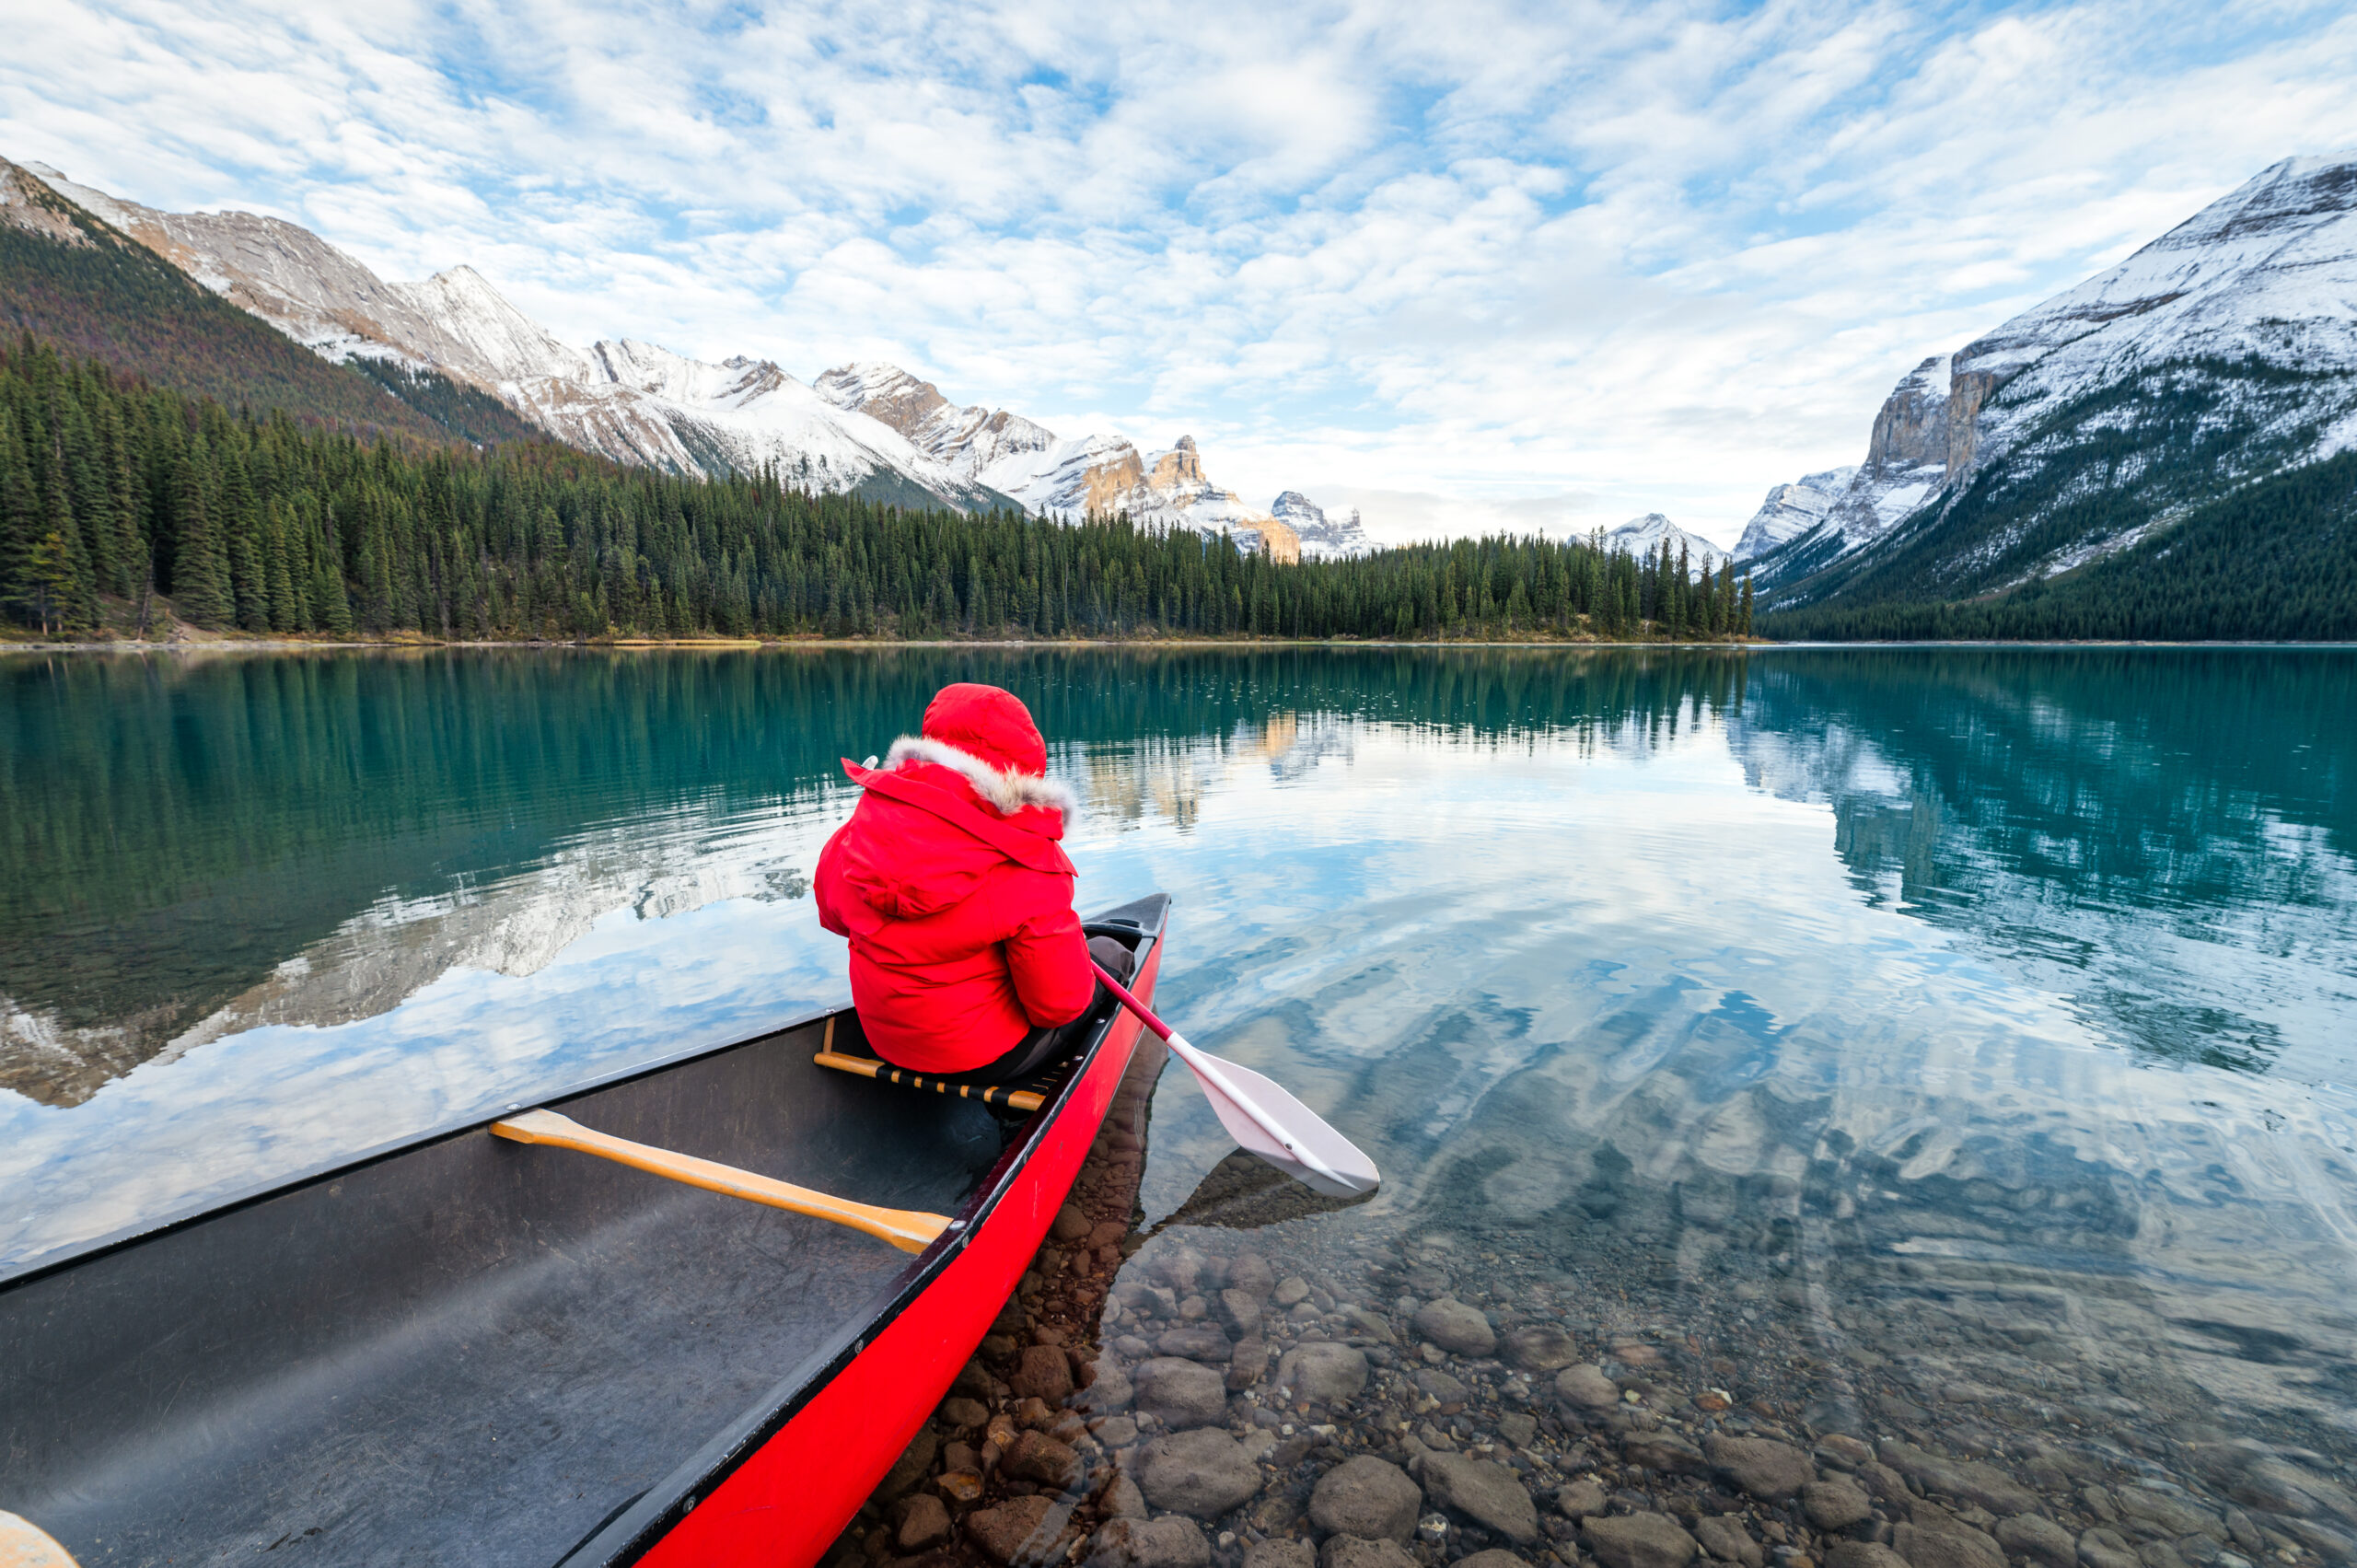 Child in red coat paddling canoe on Vancouver lake with snowy mountains in background.